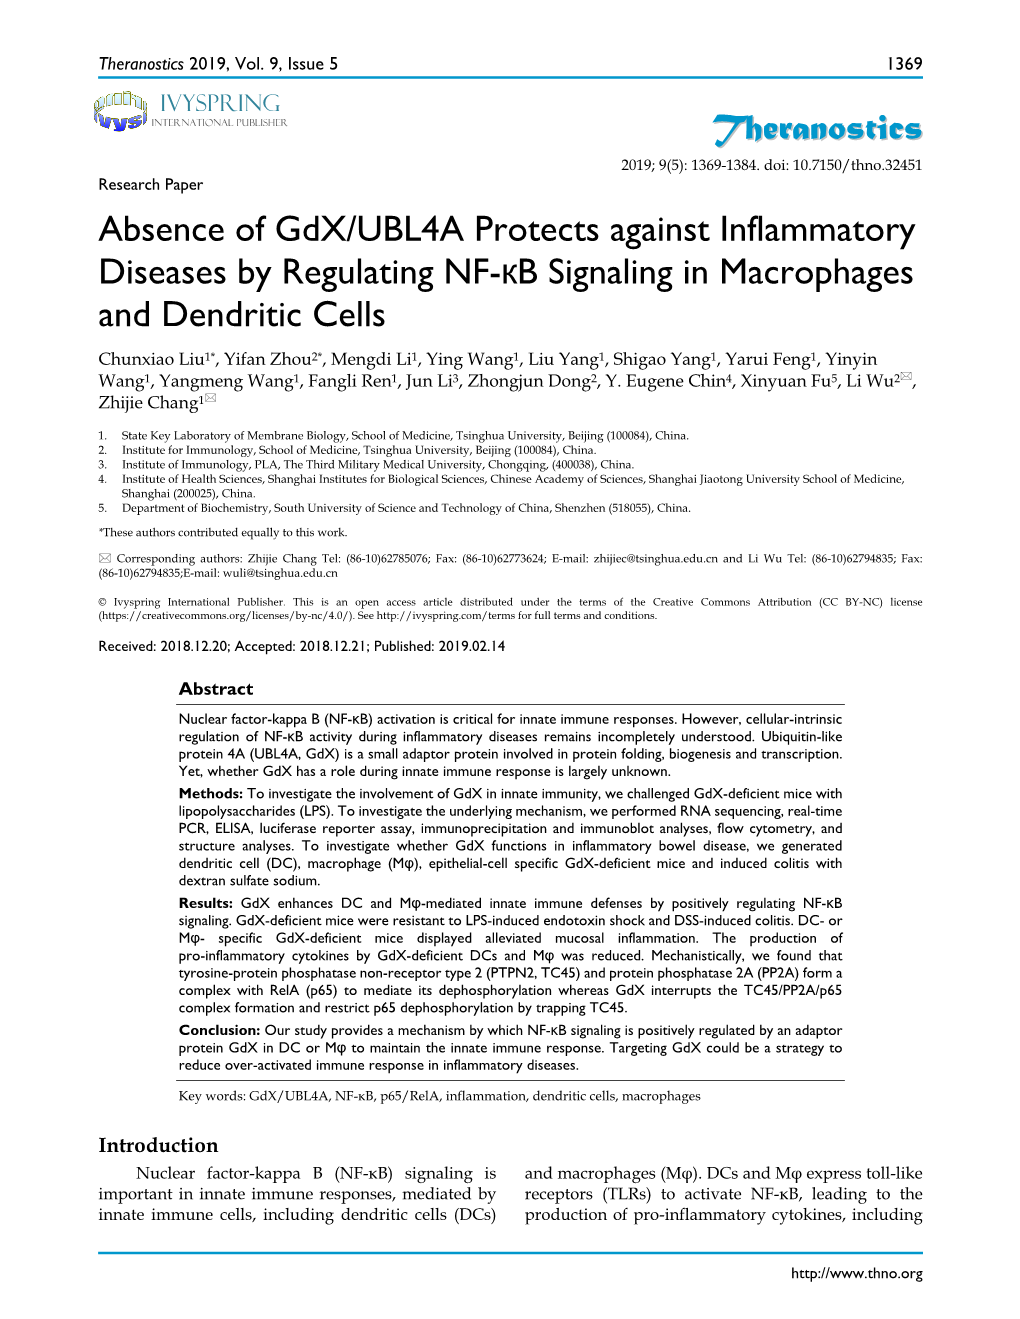 Theranostics Absence of Gdx/UBL4A Protects Against Inflammatory